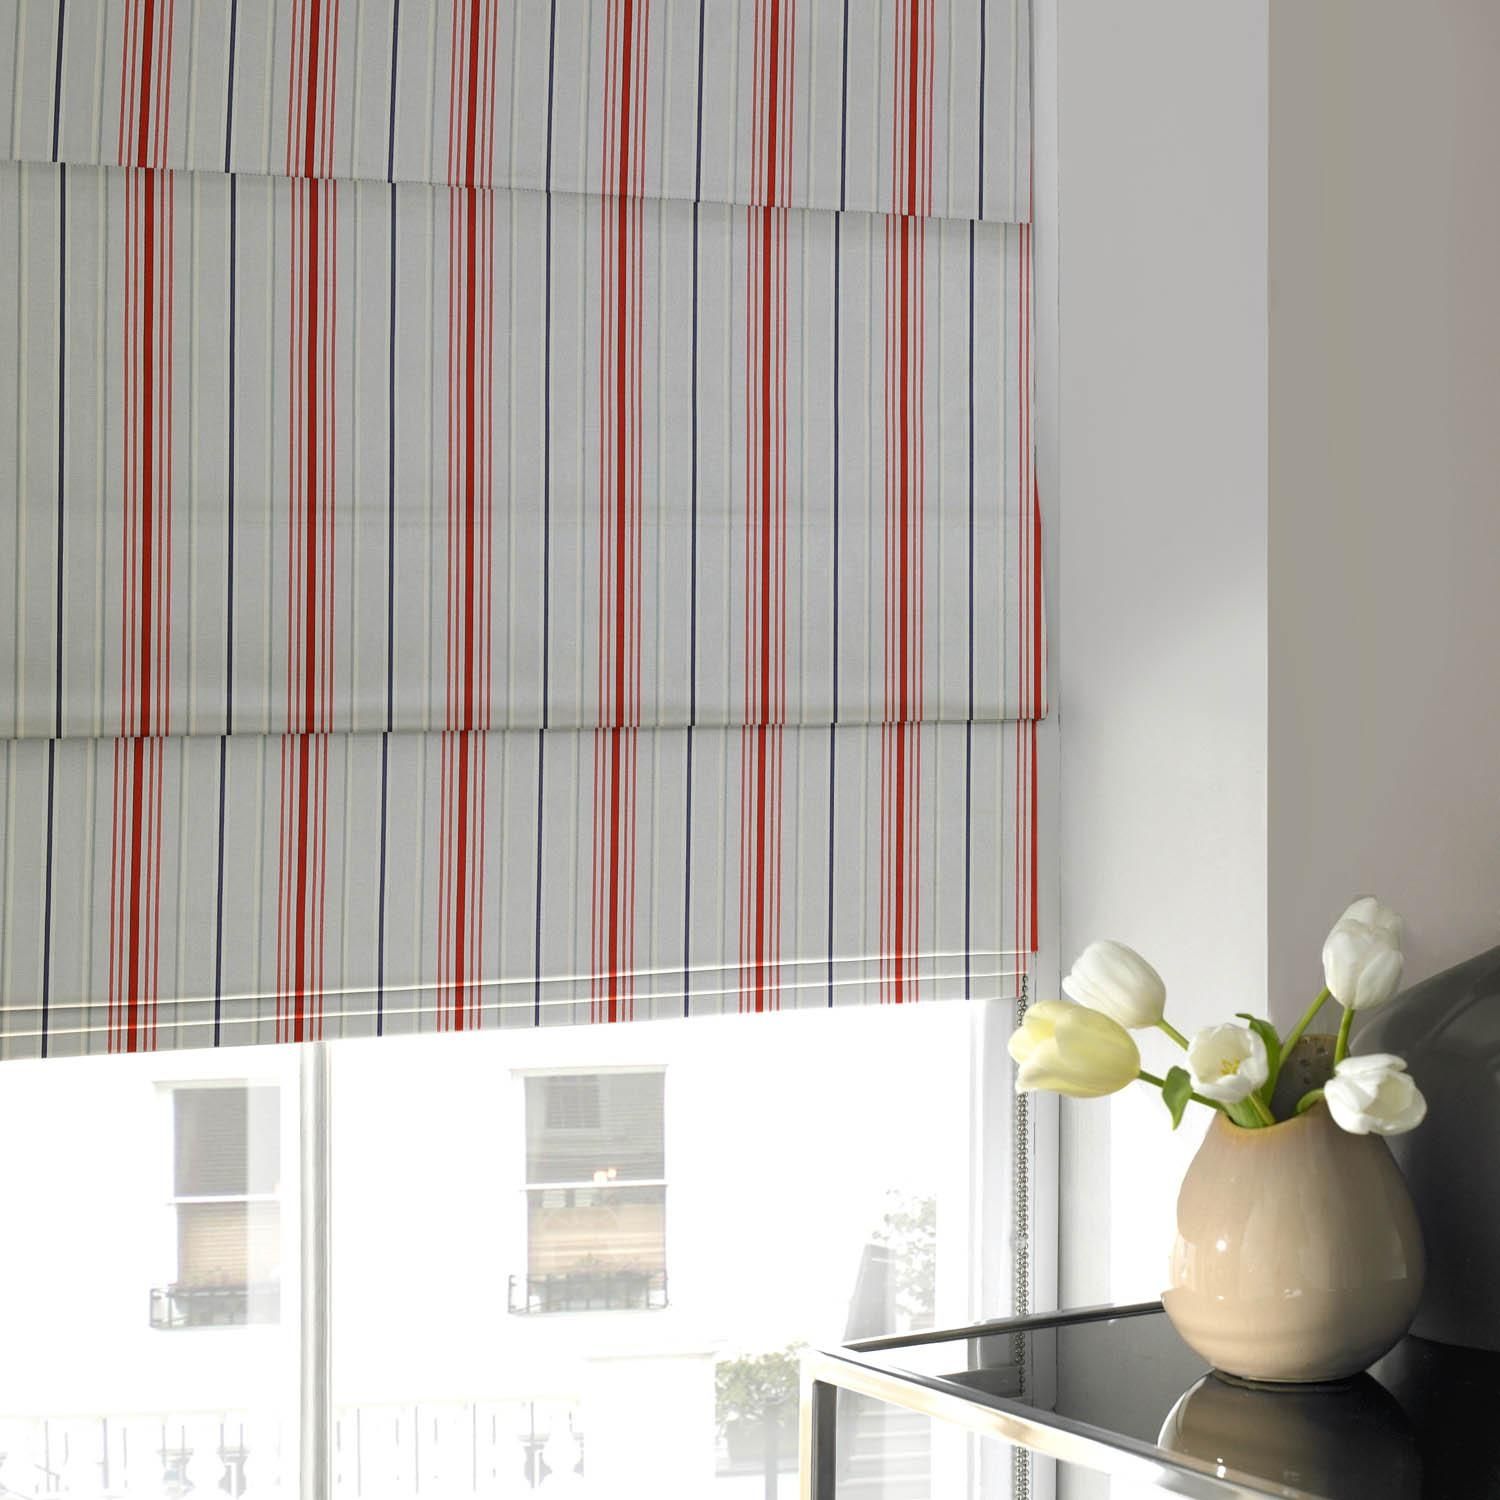 Redwhiteblue Candy Stripe Roman Blind Google Search Roman Intended For Blue And White Striped Blinds (View 1 of 15)